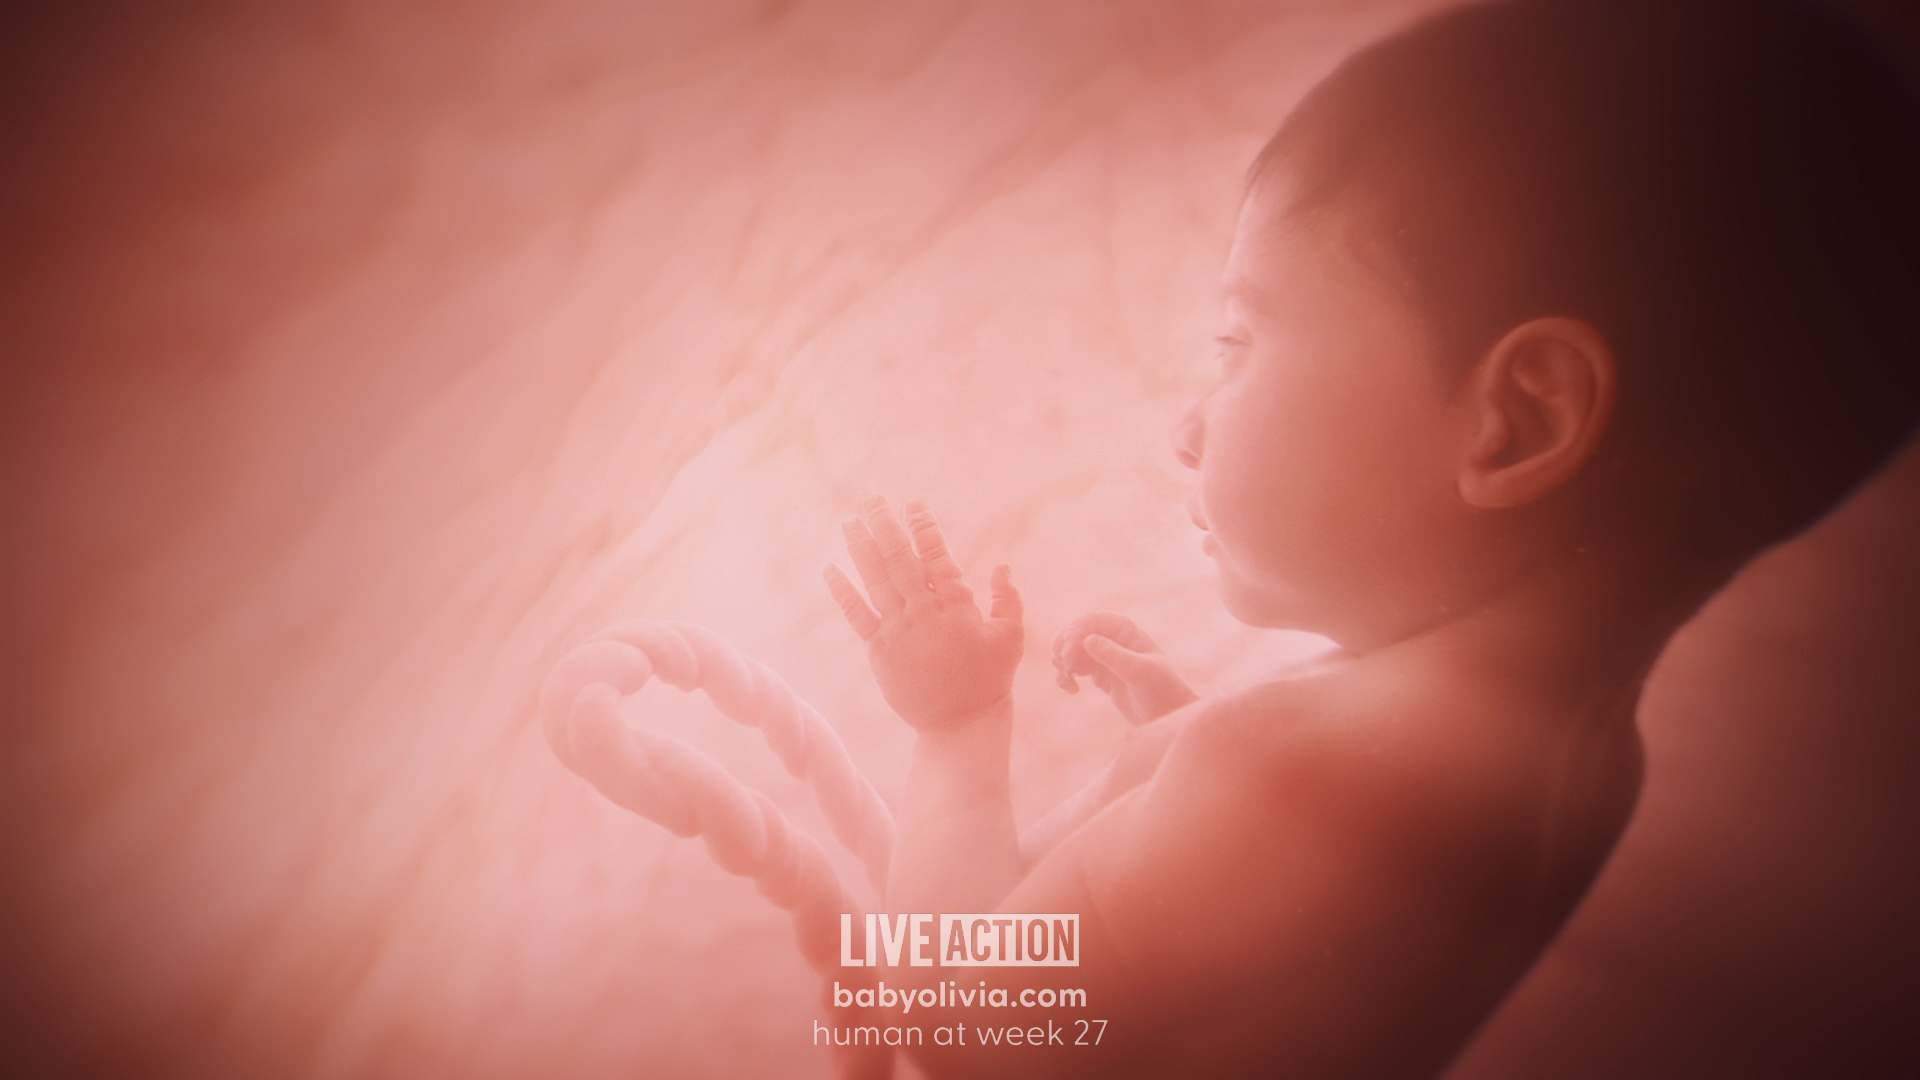 Meet Baby Olivia | A Never Before Seen Look At Human Life In The Womb